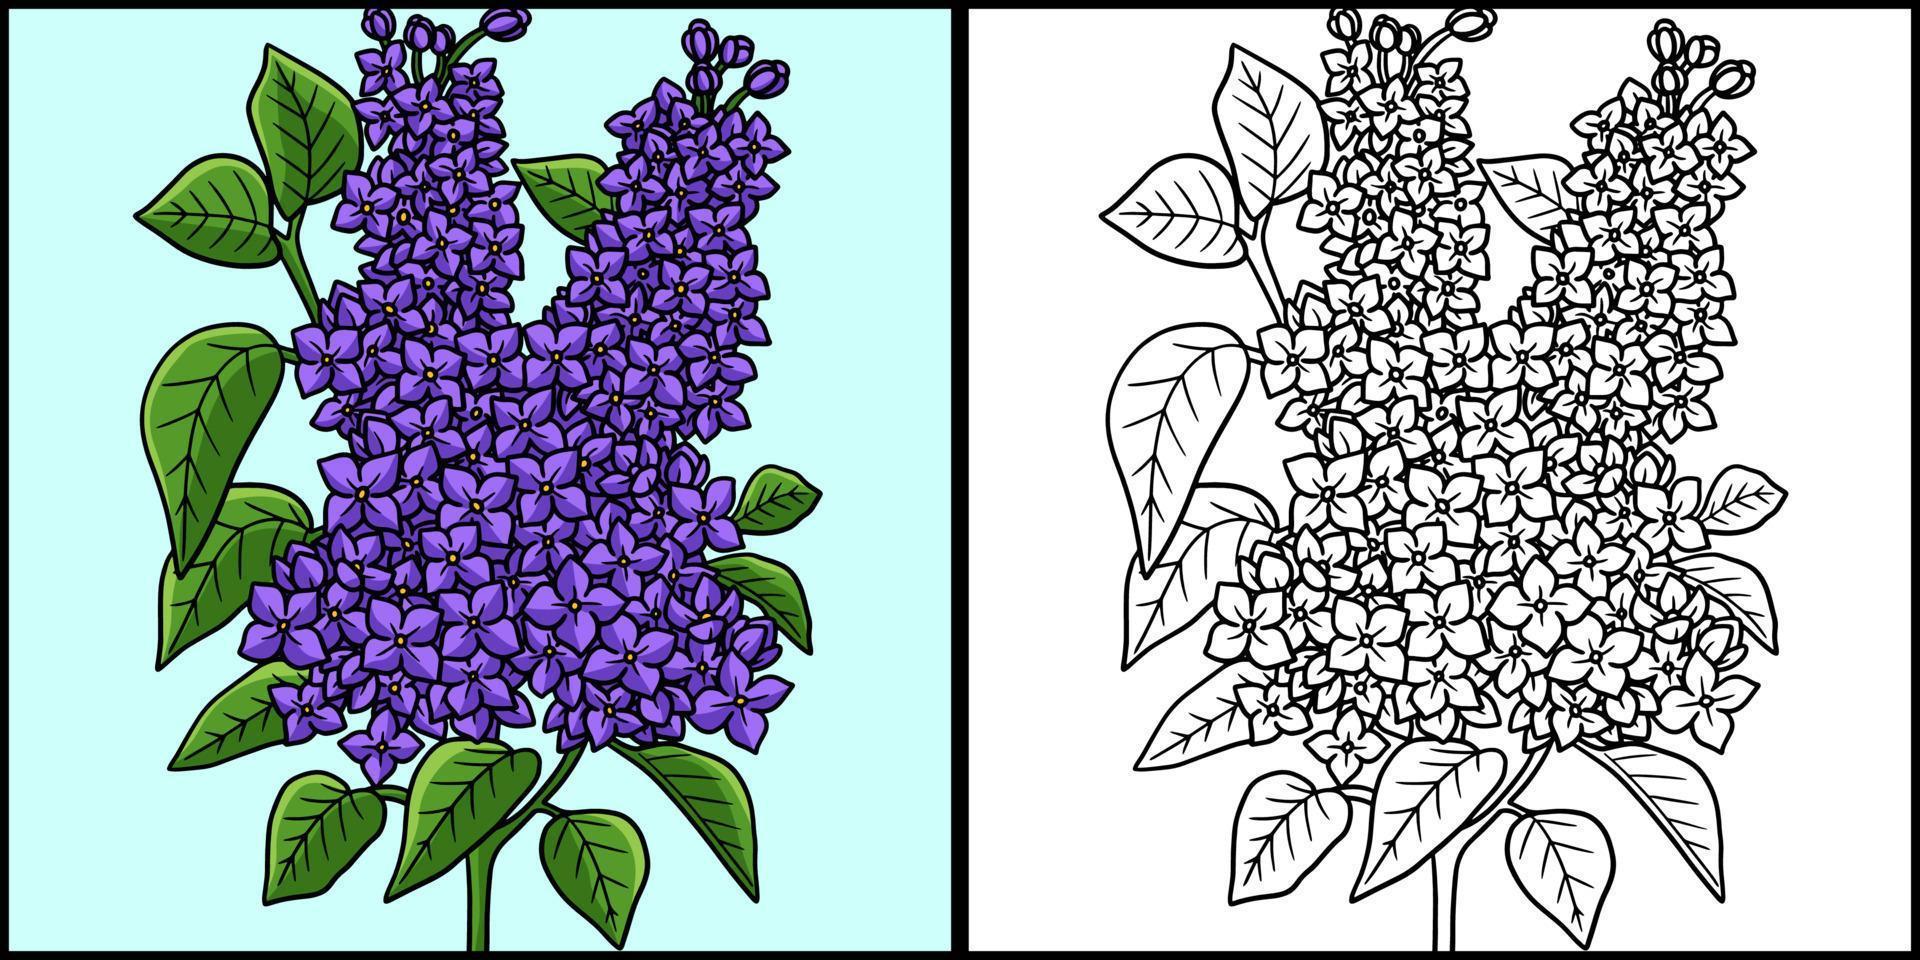 Lilac Flower Coloring Page Colored Illustration vector